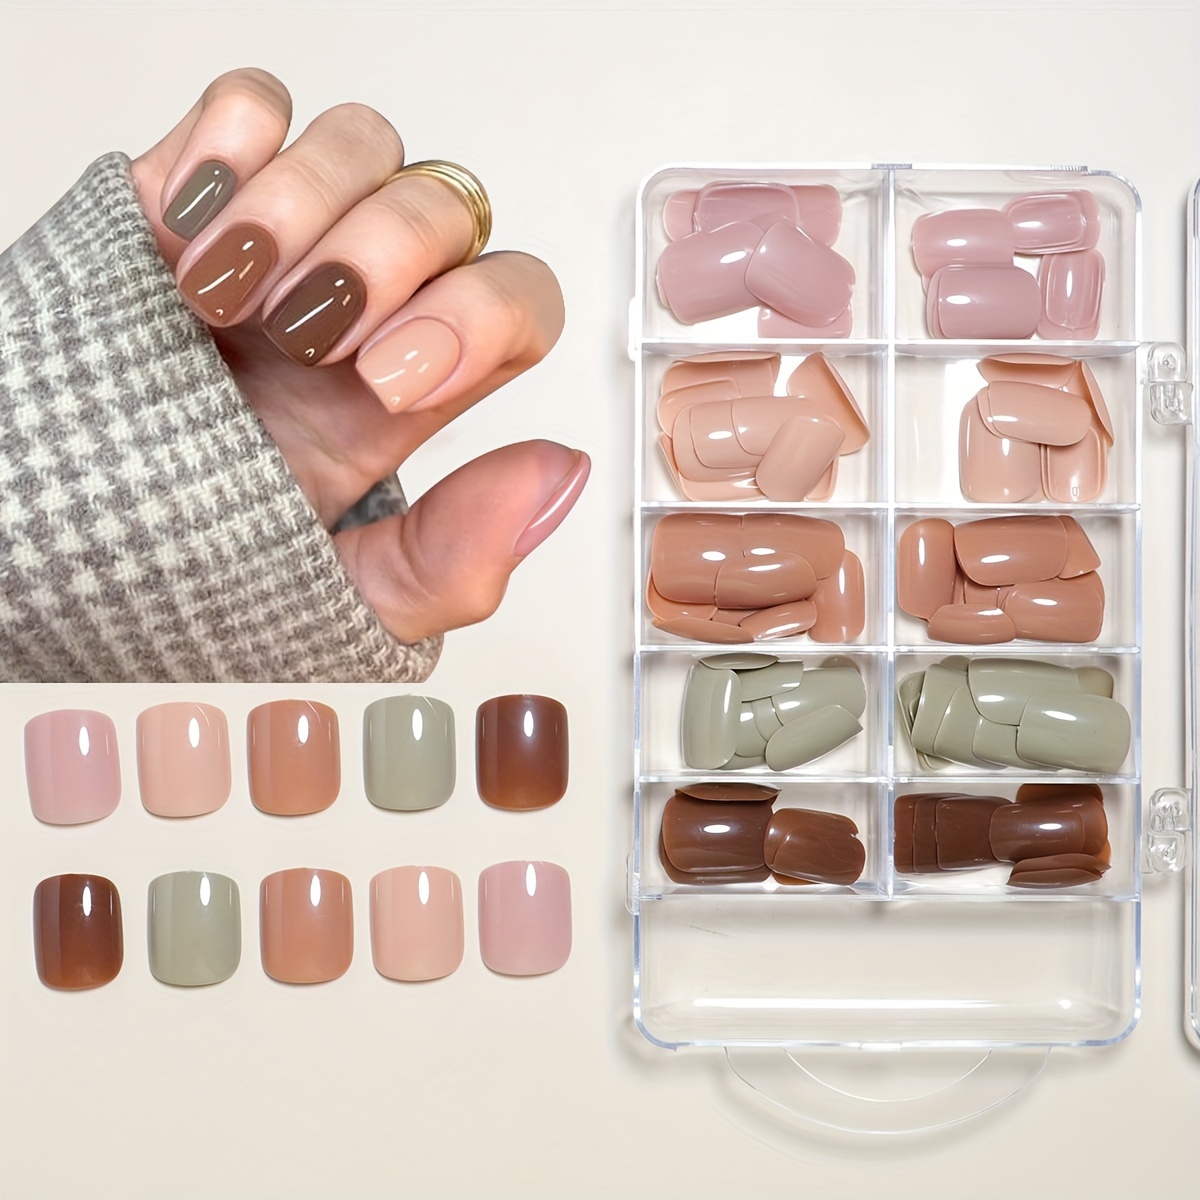 

120-piece Glossy Press-on Nails Set - Short Square, Solid Colors In Brown & Pink, Perfect For Diy Manicures